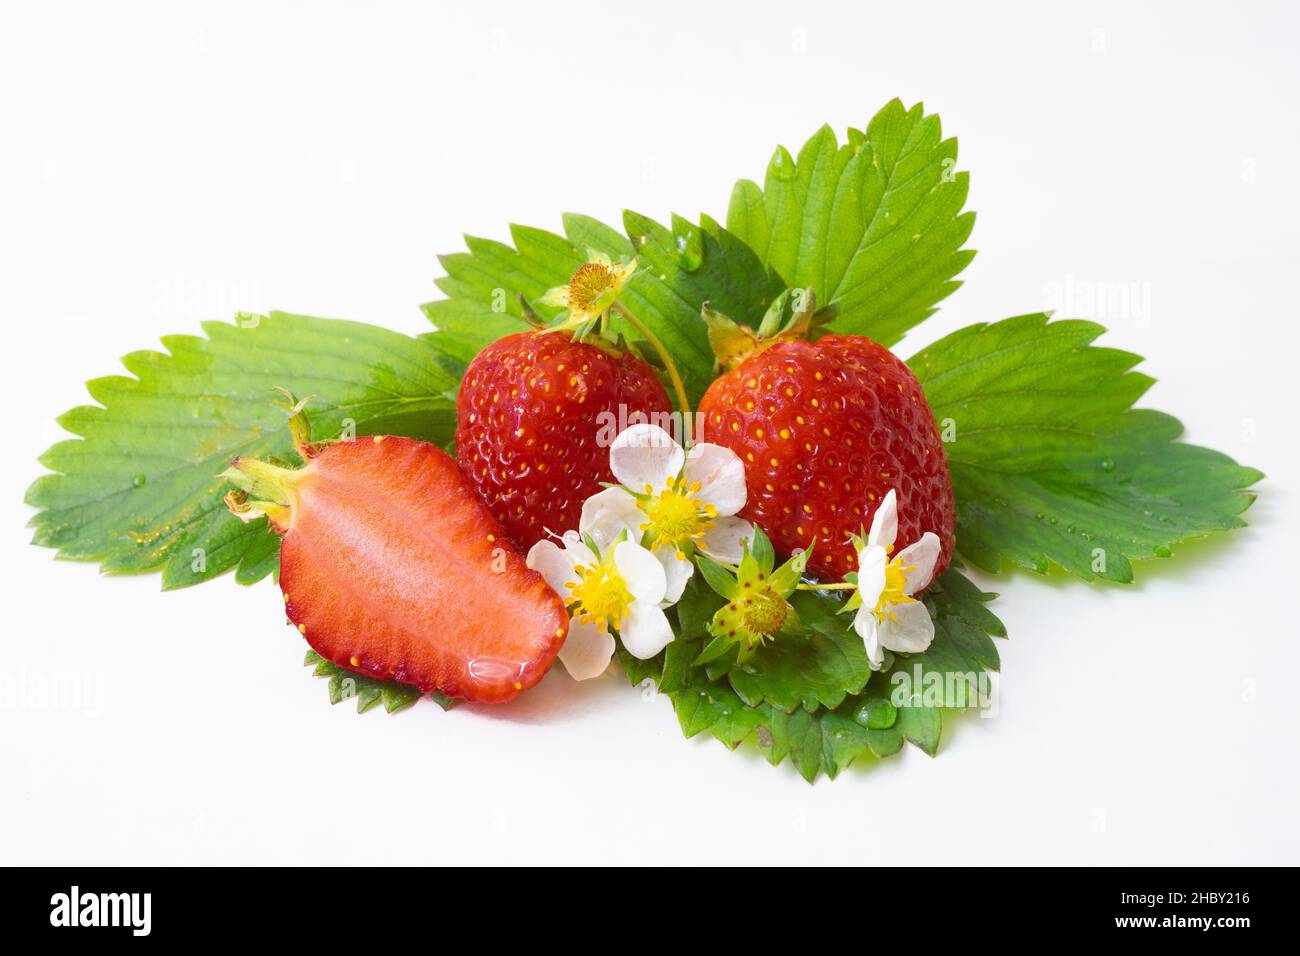 Strawberries on green leaves and white flowers, isolated on white background. Stock Photo